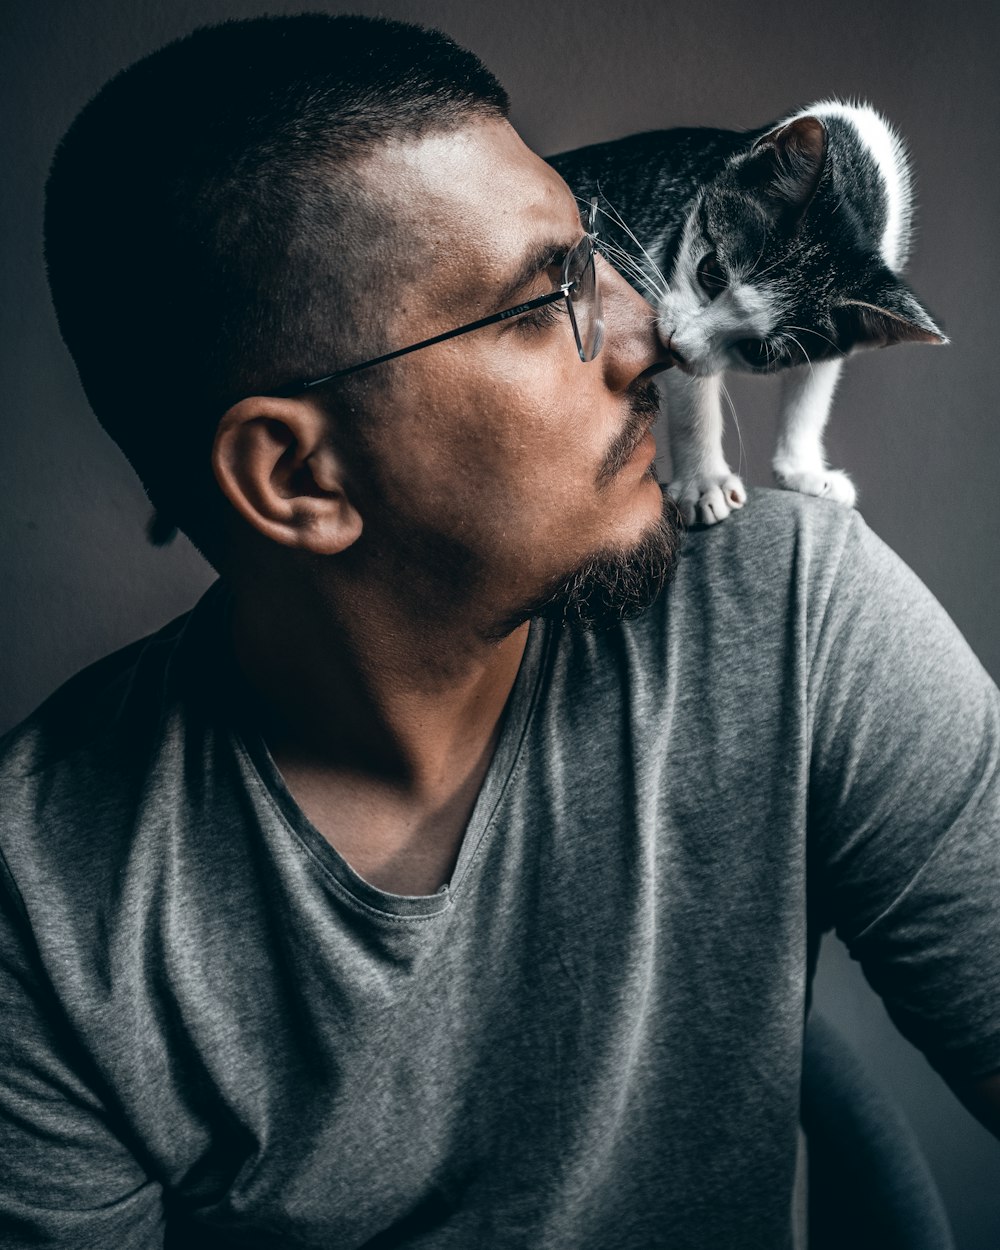 man in gray crew neck shirt holding white and black cat